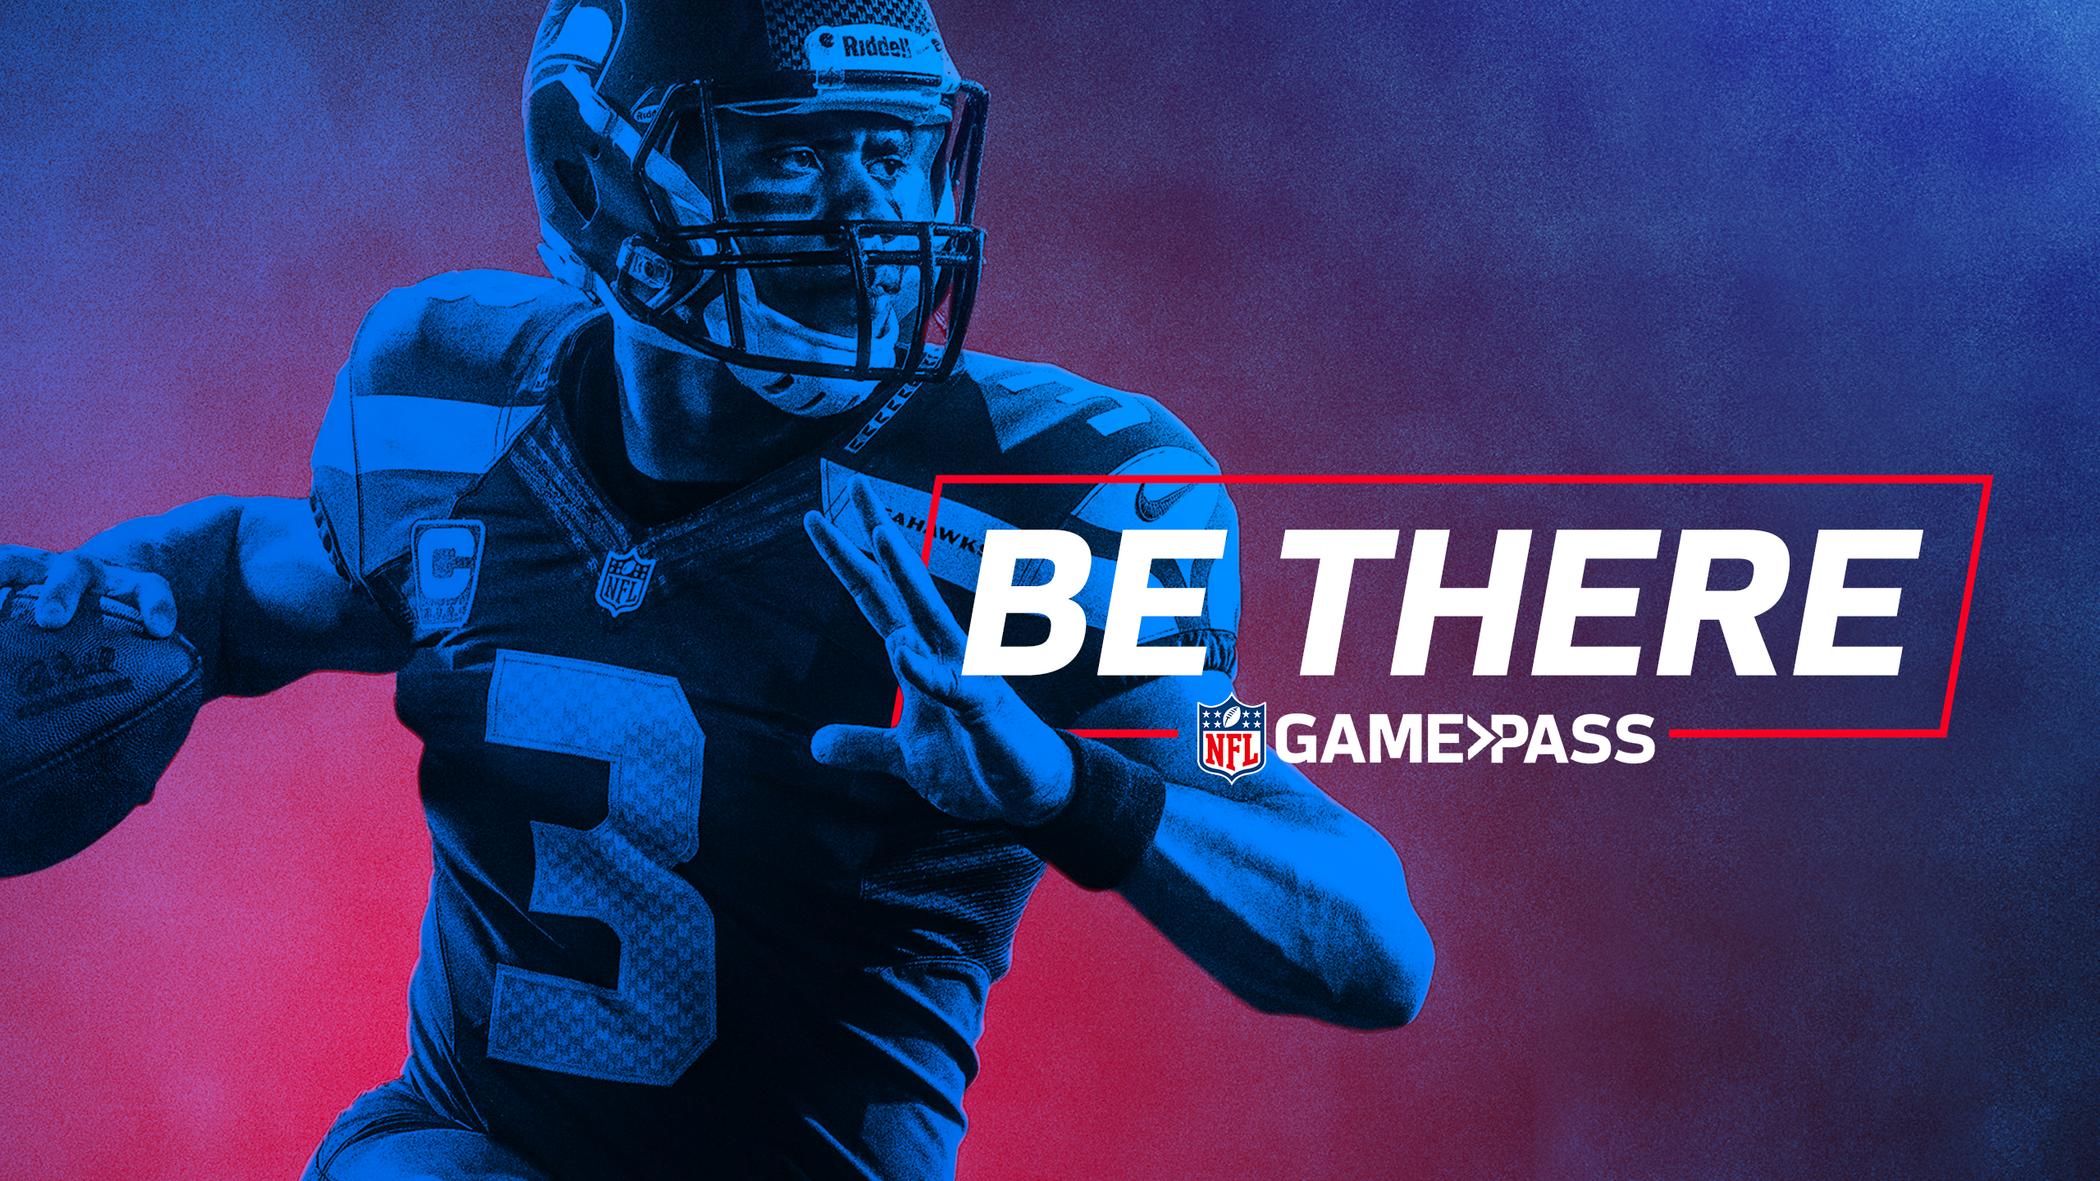 how much is annual game pass to nfl game pass